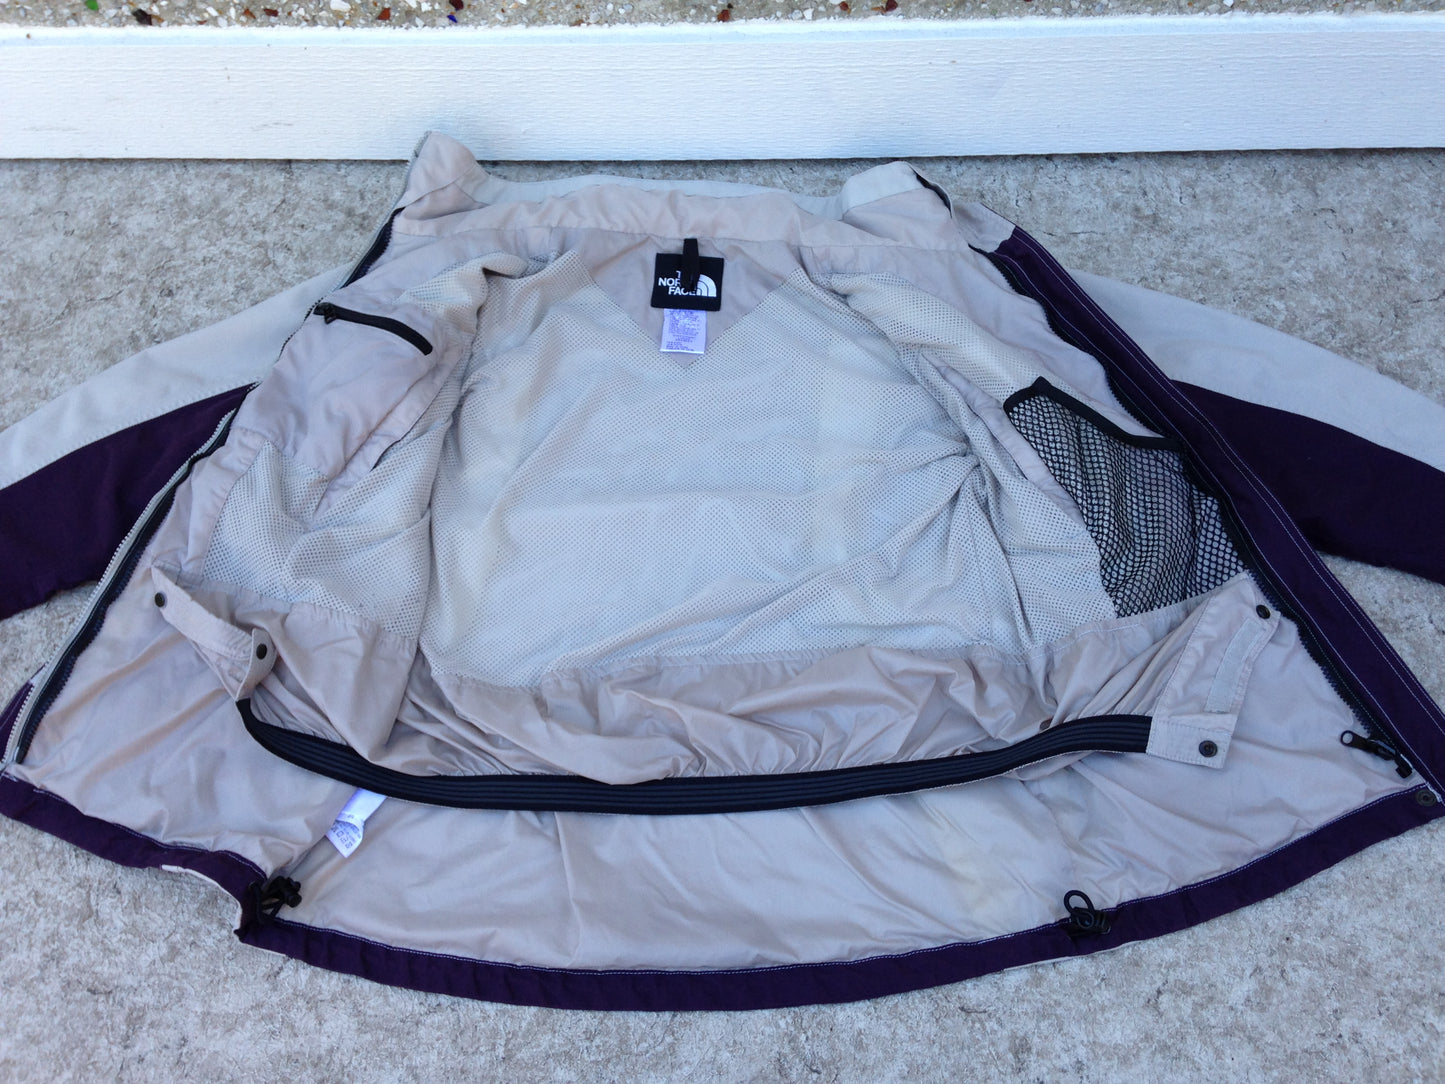 Winter Coat Ladies Size Large The North Face Grey Purple With Snow Belt Excellent